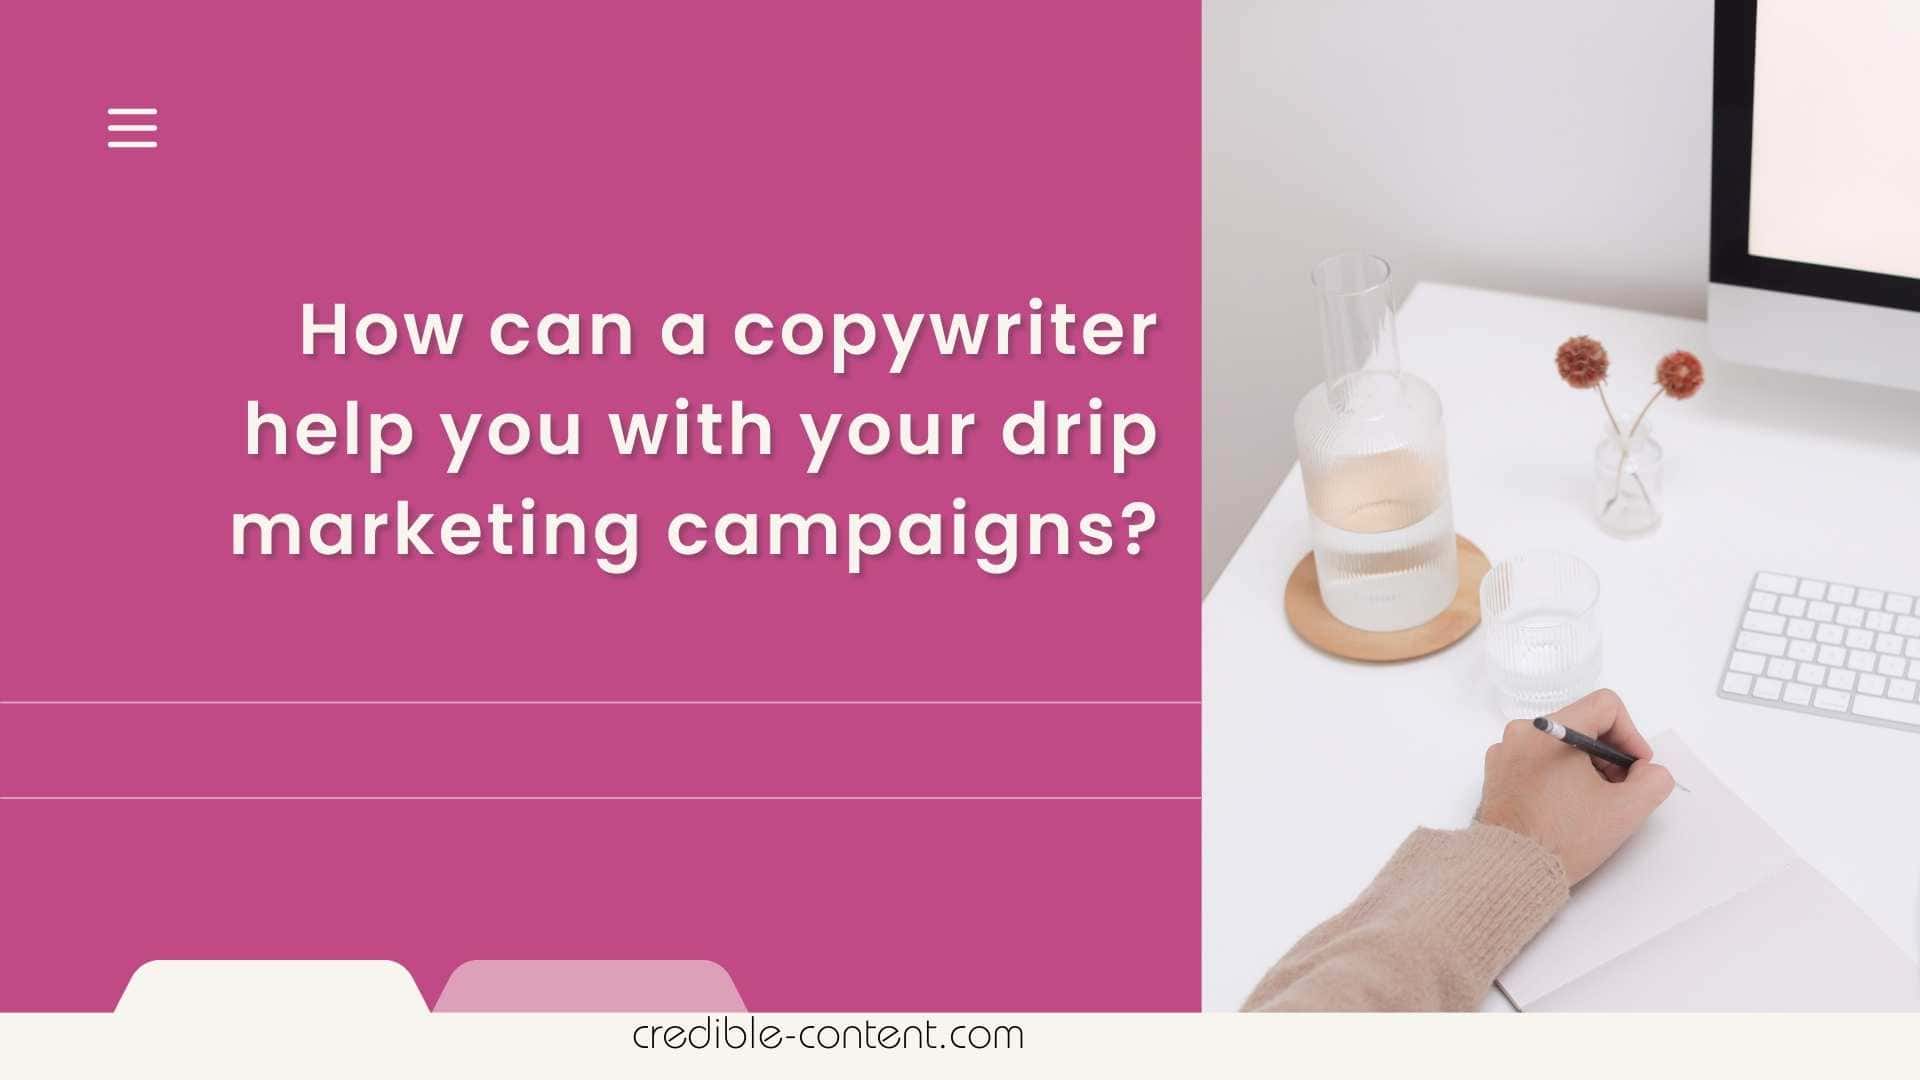 How can a copywriter help you with your drip marketing campaigns